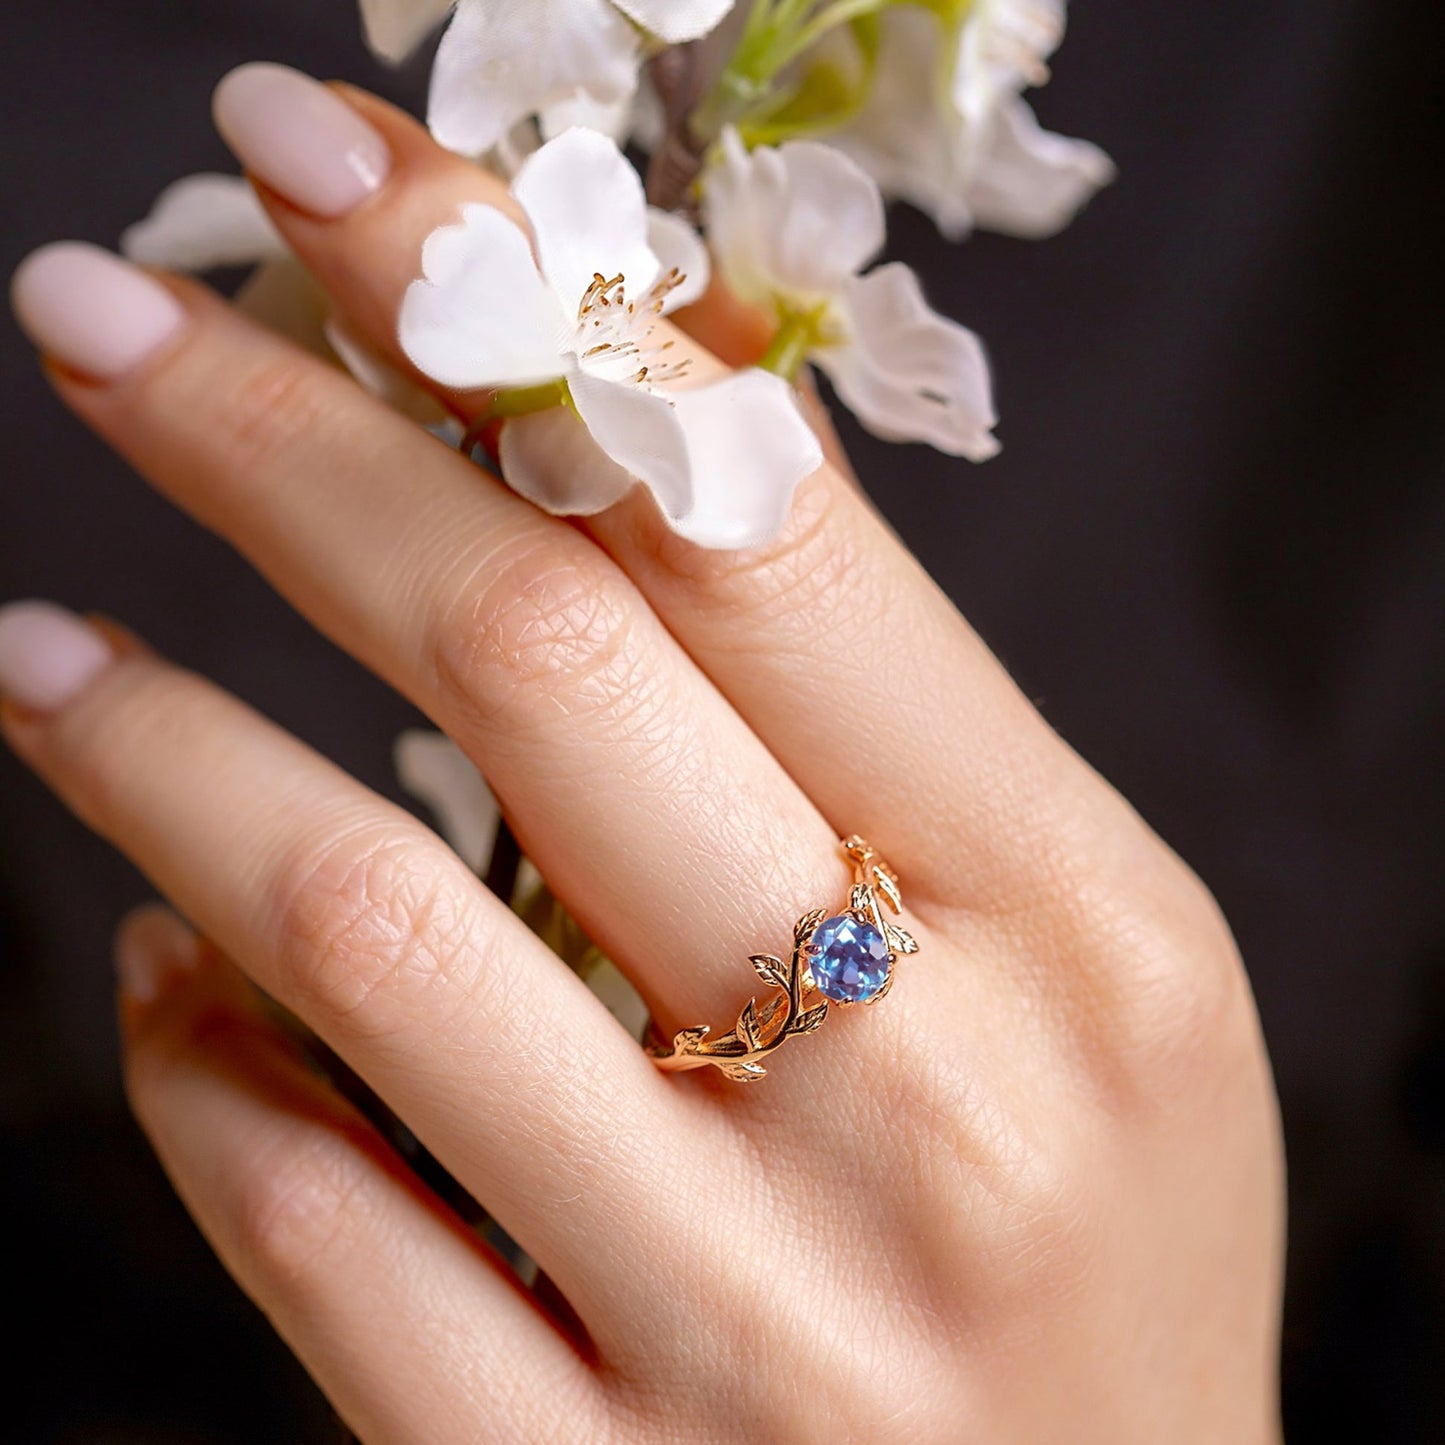 Ring with a blue alexandrite stone on a tender woman hand, which holds flowers